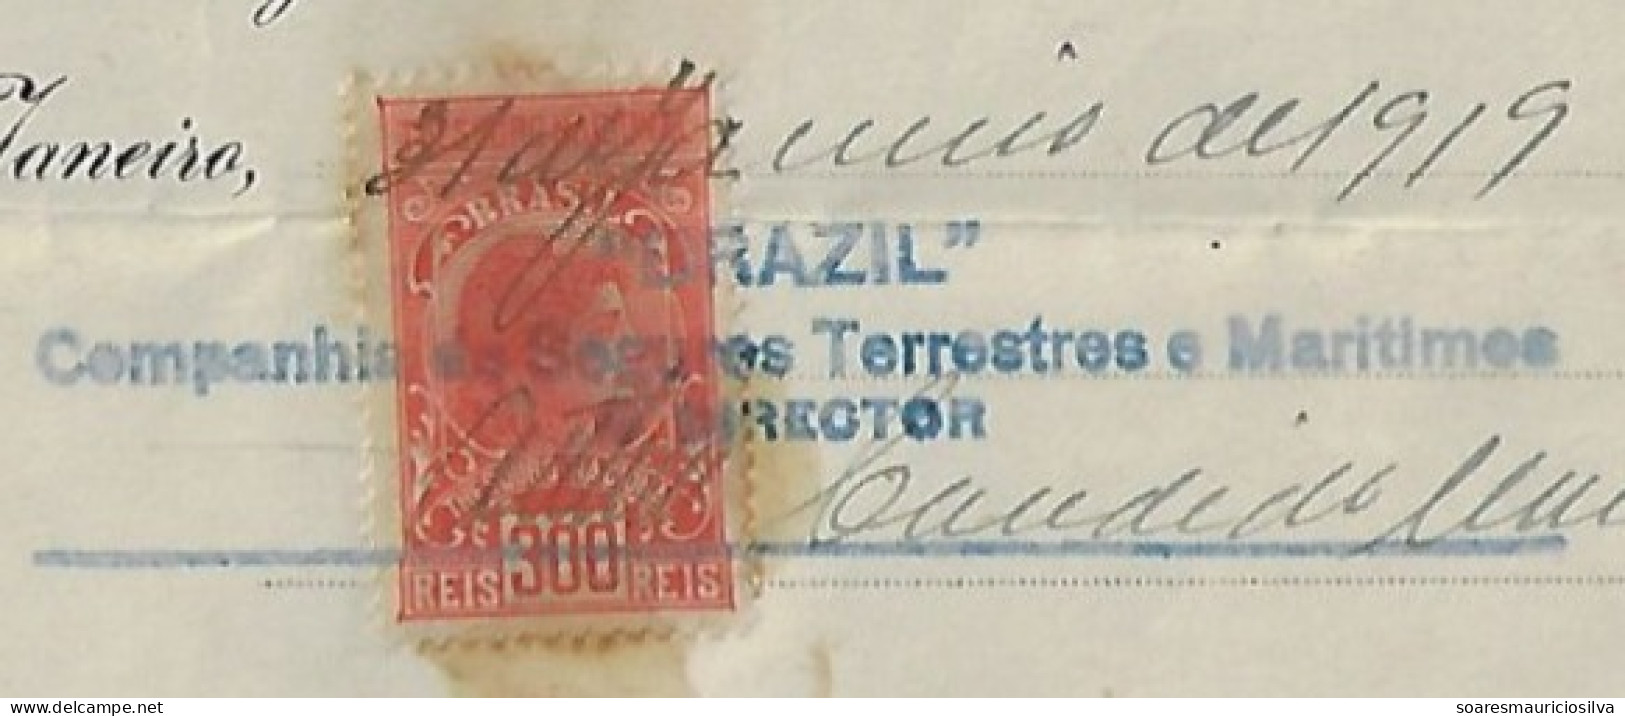 1919 Brazil Insurance Company Receipt From Rio De Janeiro Tax Stamp From The National Treasury 300 Réis - Covers & Documents